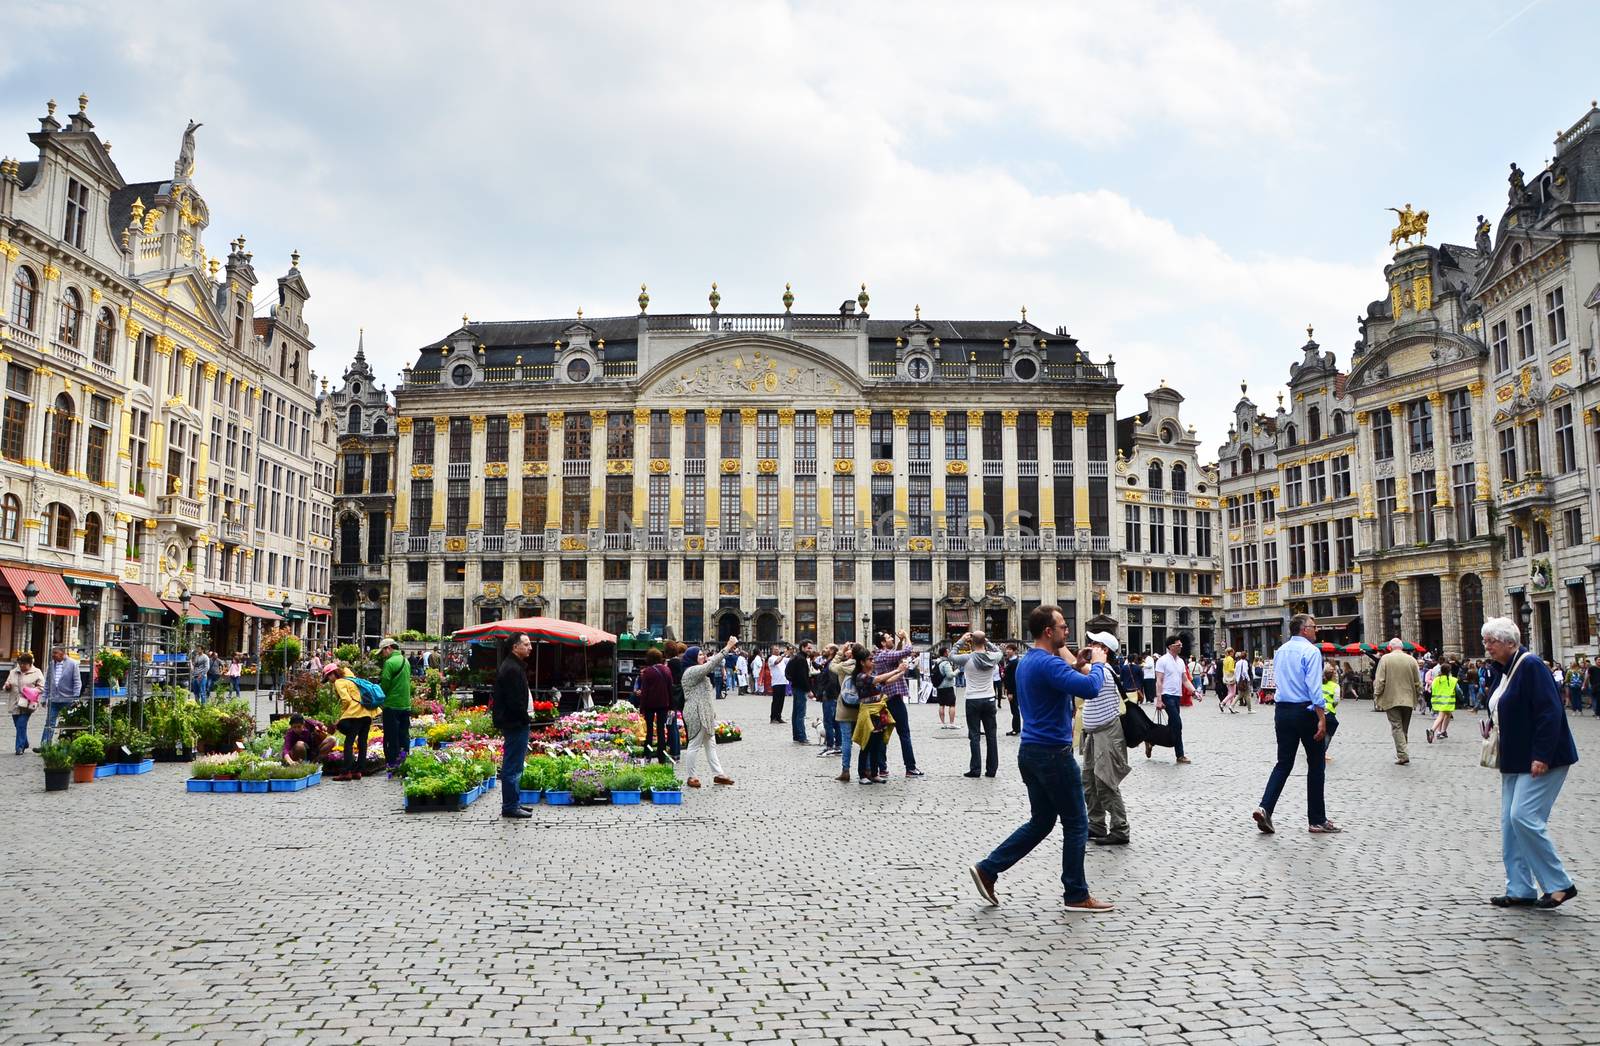 Brussels, Belgium - May 13, 2015: Many tourists visiting famous Grand Place (Grote Markt) the central square of Brussels. by siraanamwong